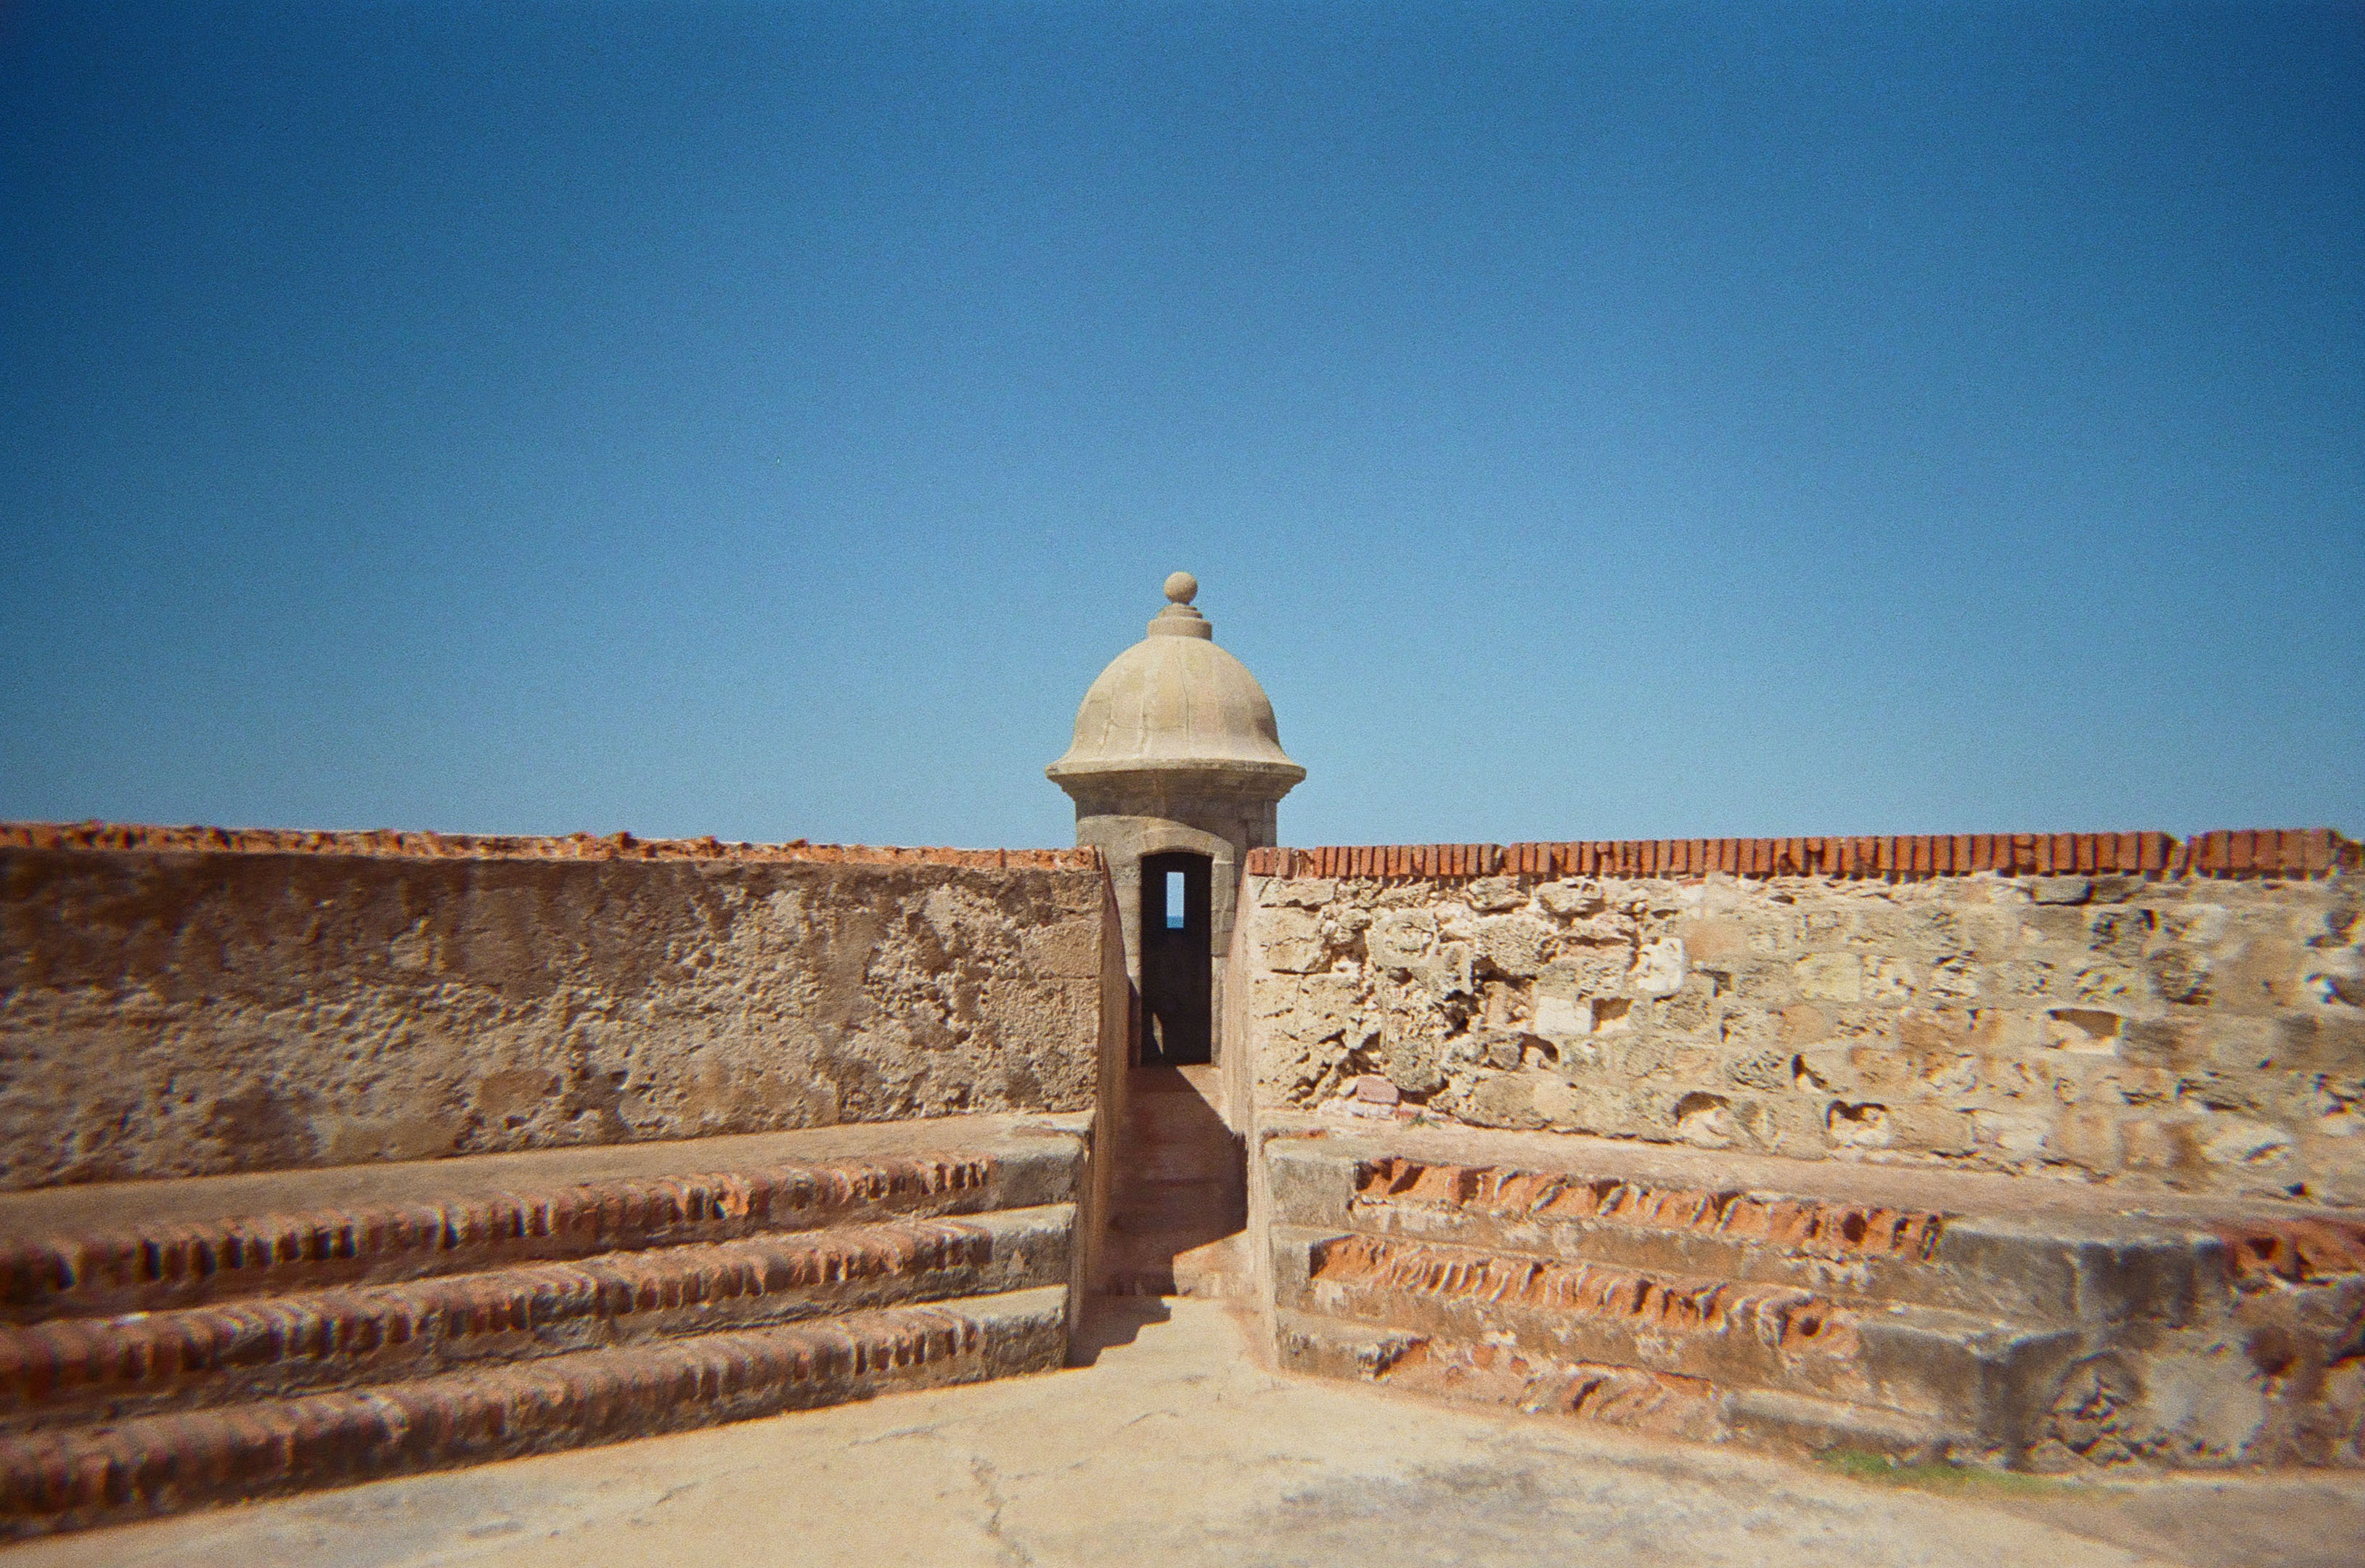 look-out towers on the walls of the fort